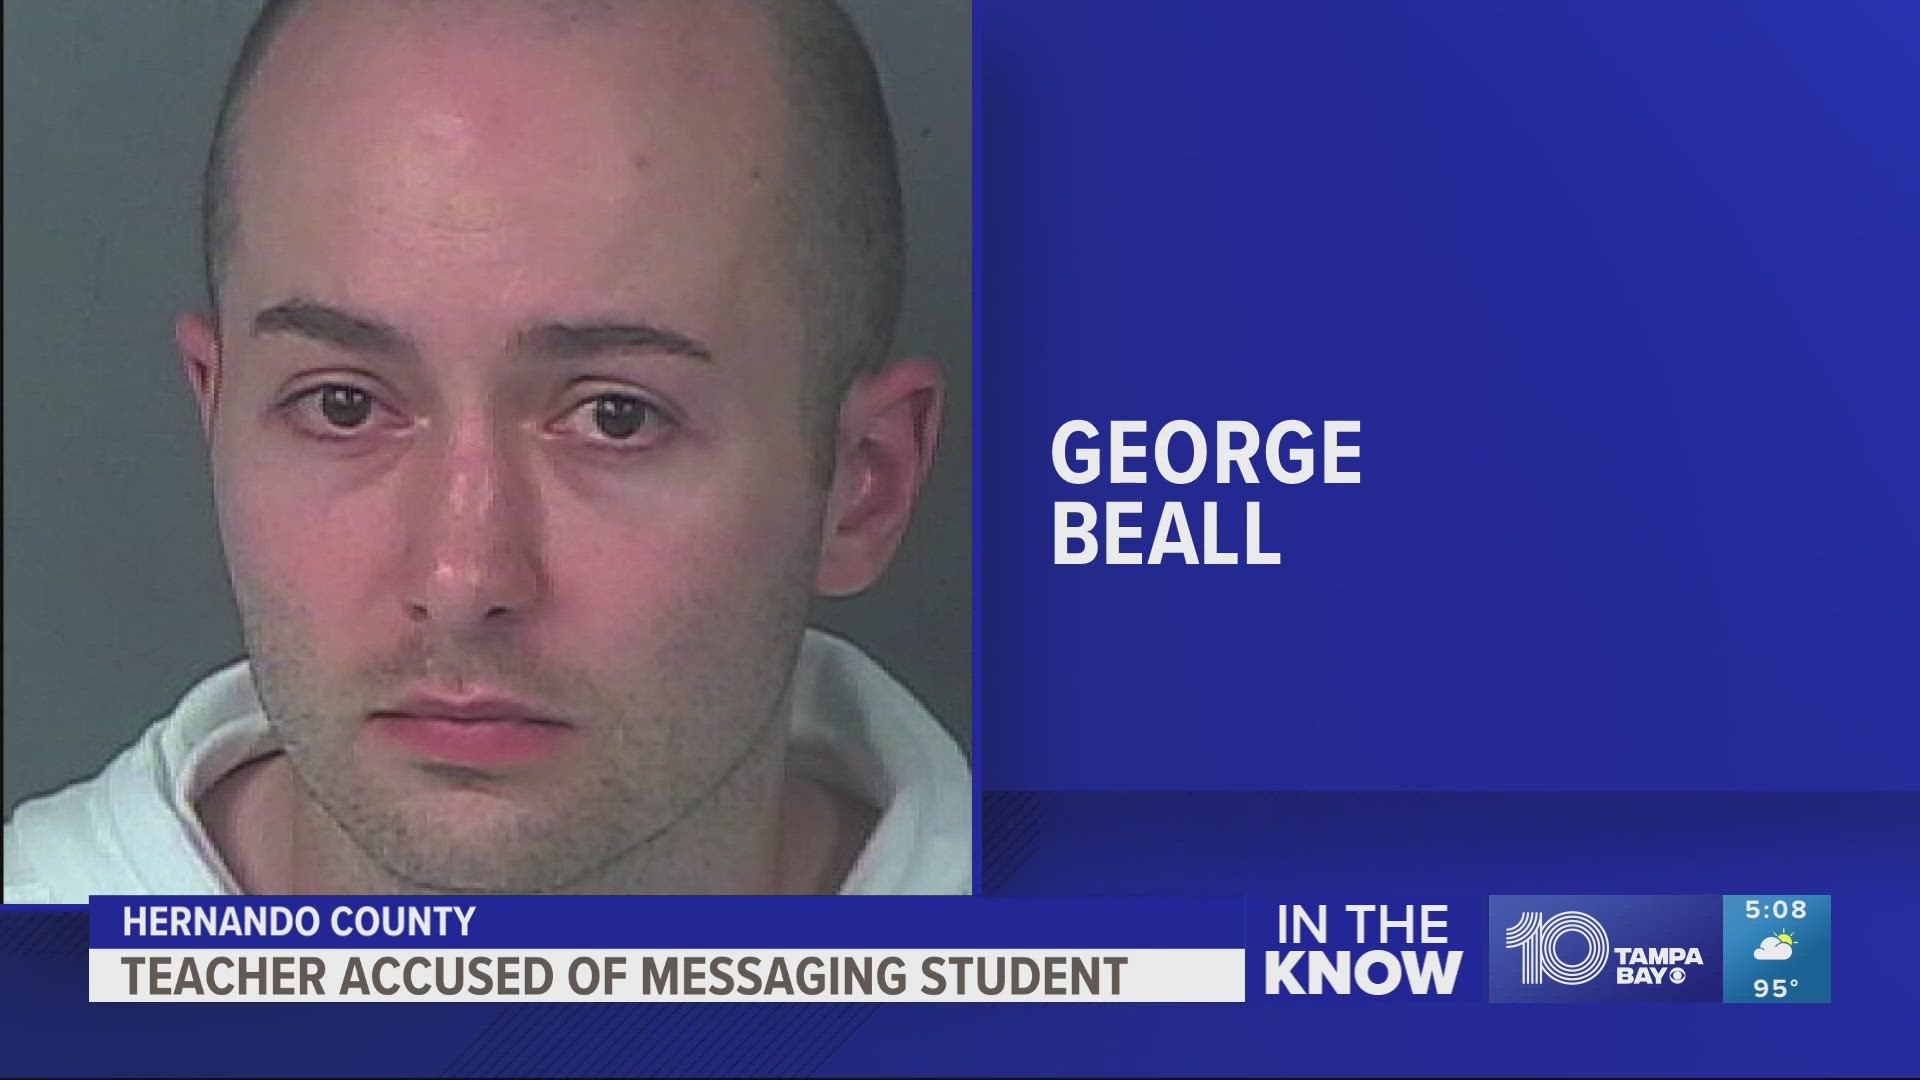 Deputies said George Beall messaged the teen every day even though the teen had very little interaction and often gave one-word responses.